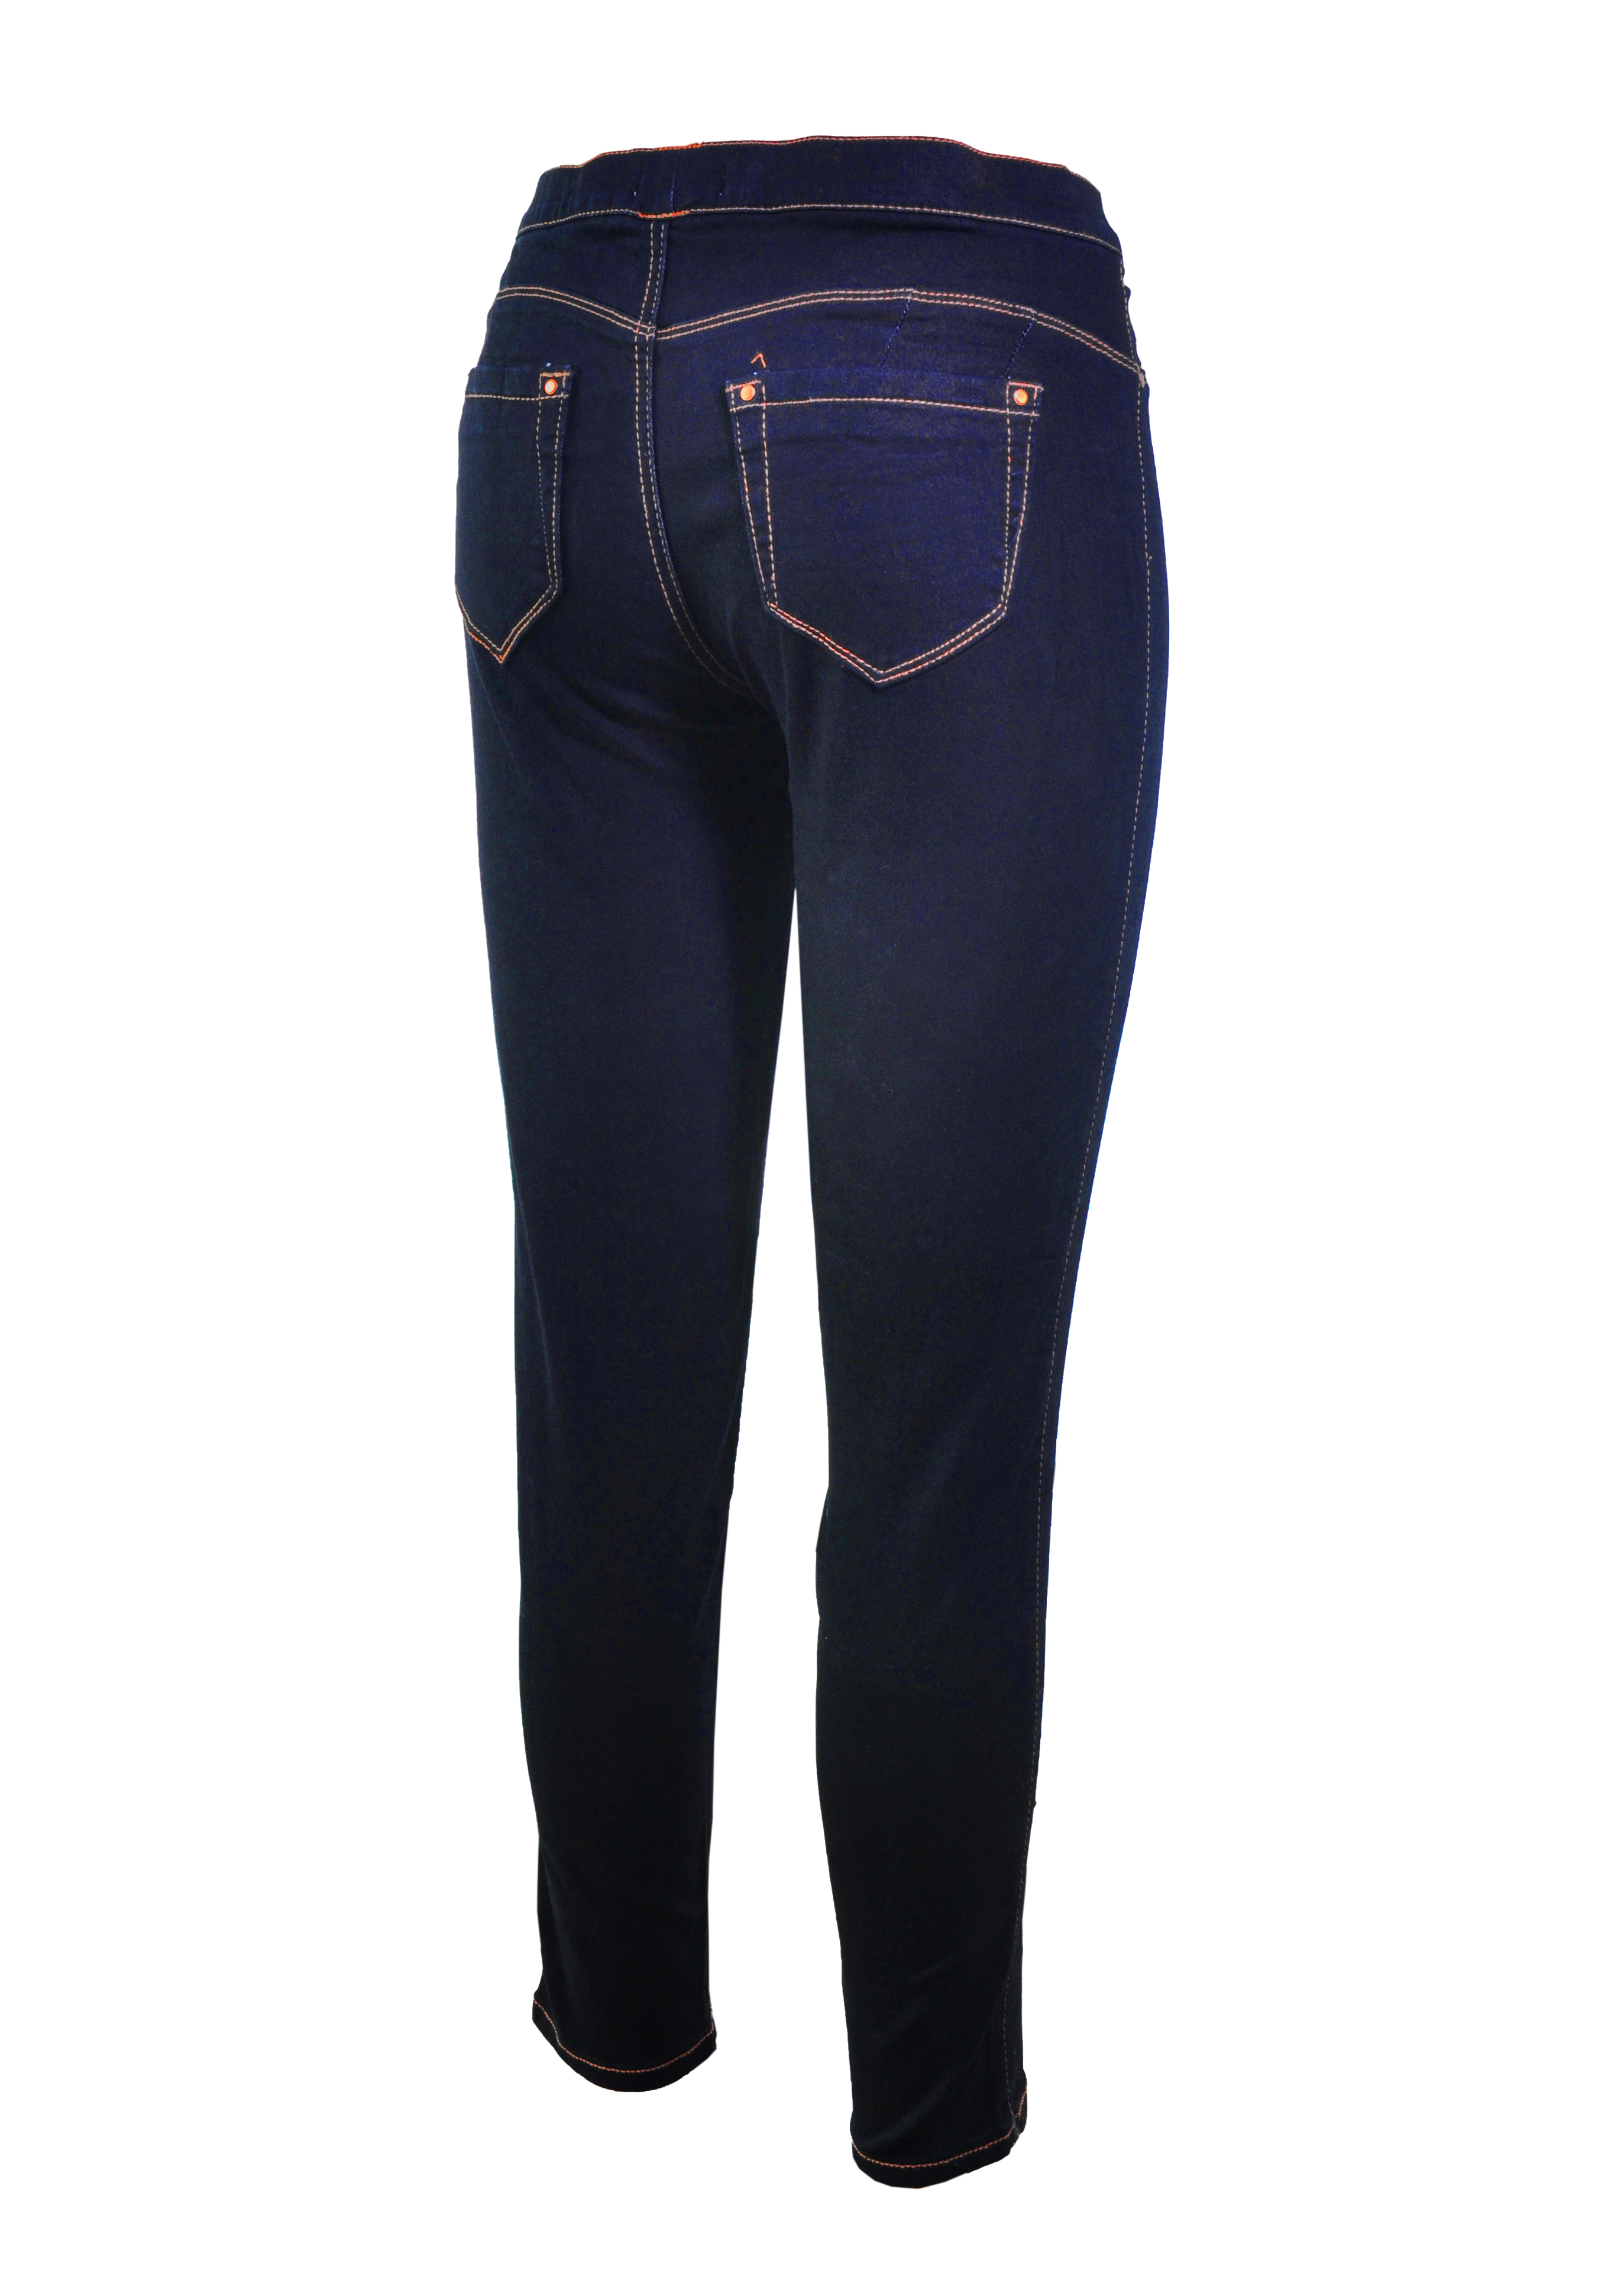 Buy Outer Wear Women's Stretch Fit Denim Jeggings (OW0282-8-L_Navy Blue_L)  at Amazon.in